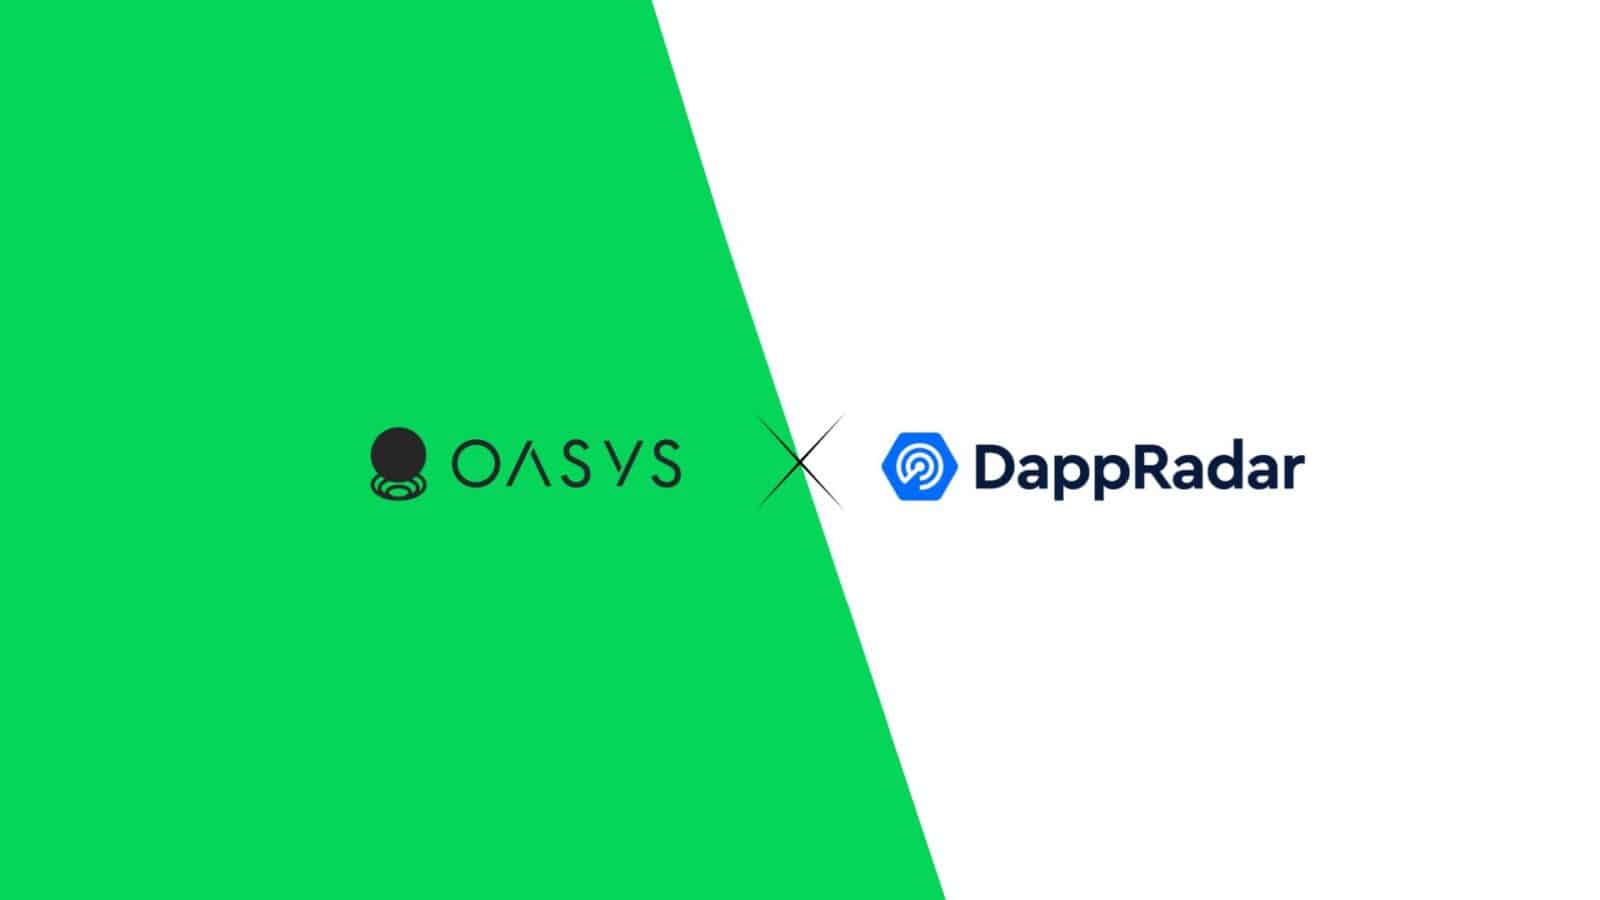 Oasys Network Partners with DappRadar for Enhanced Game and App Visibility